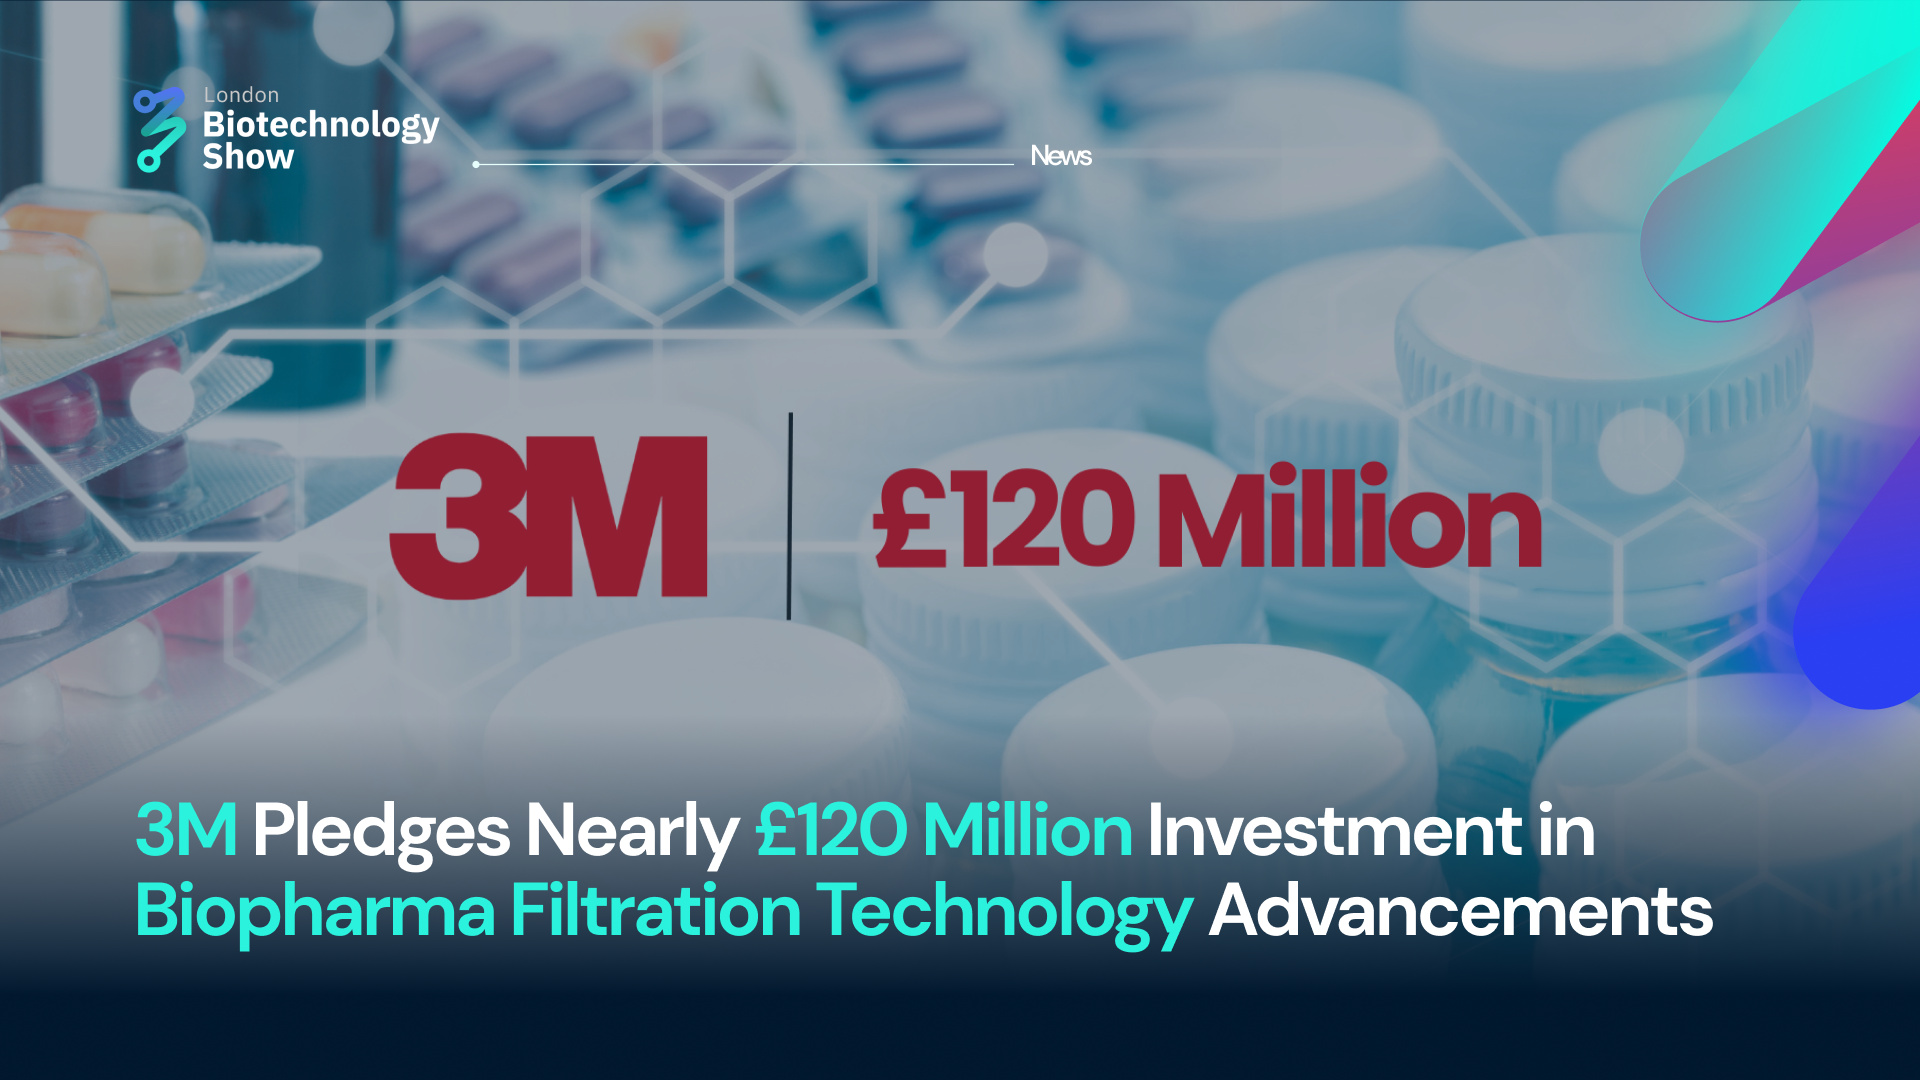 3M Pledges Nearly £120 Million Investment in Biopharma Filtration Technology Advancements